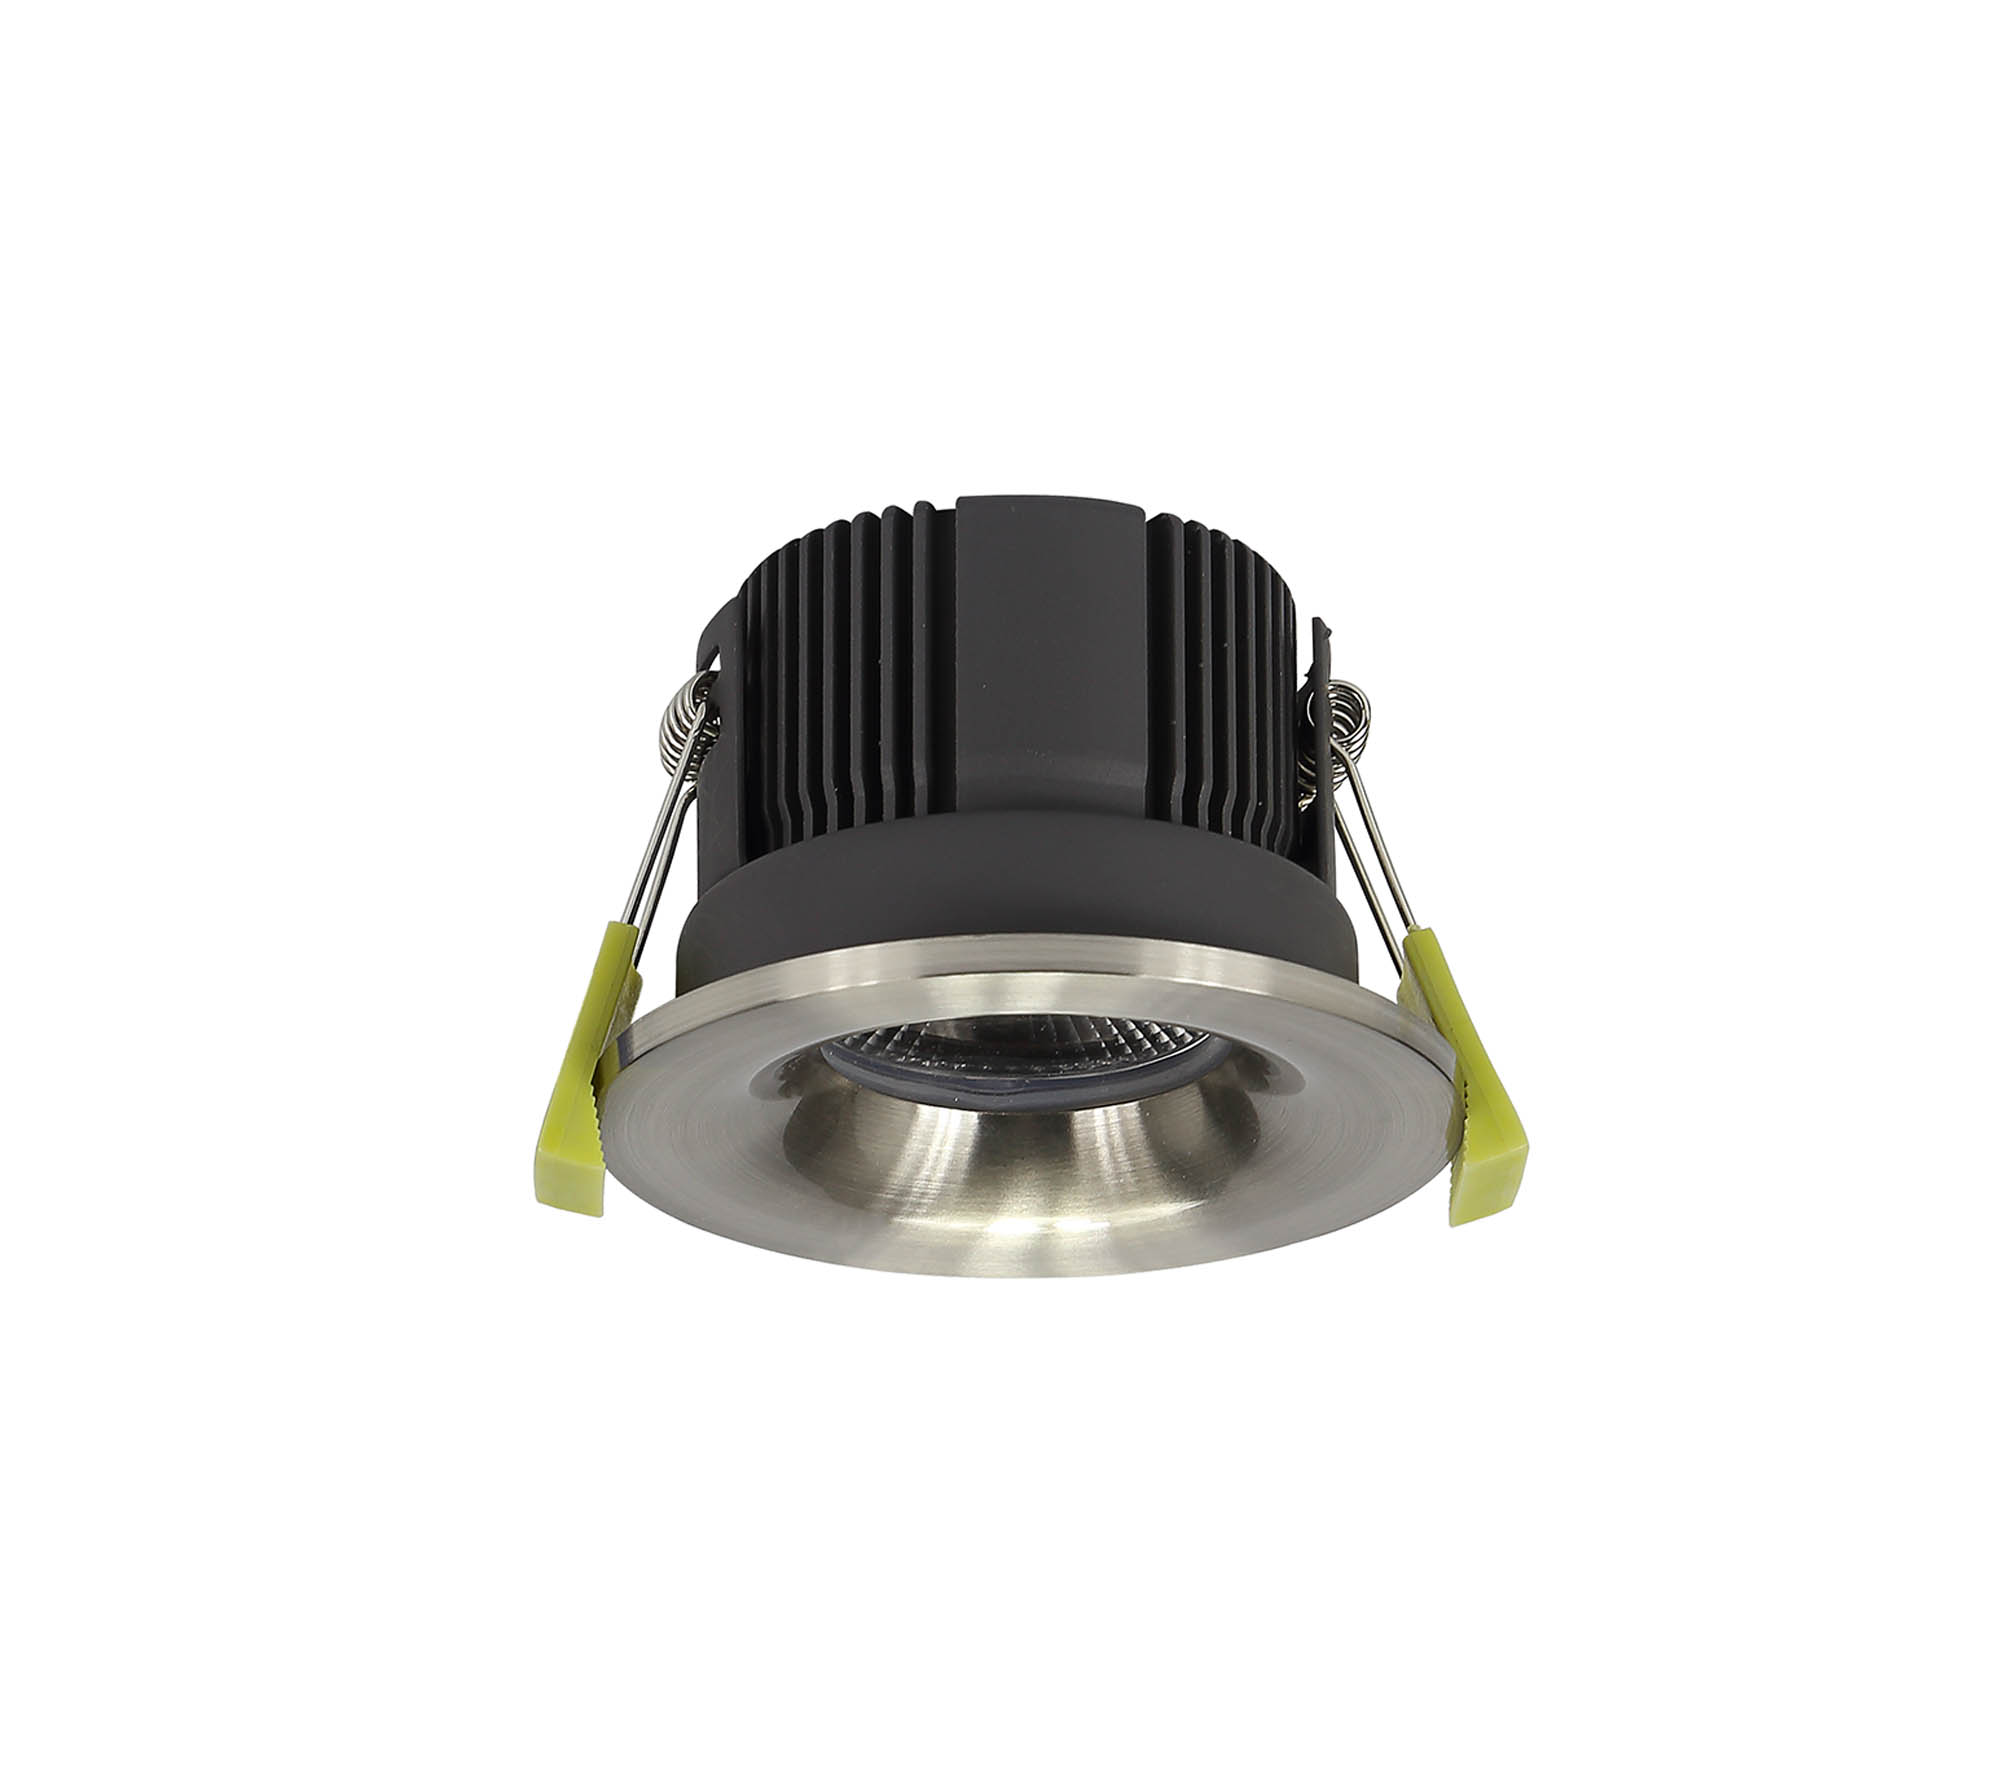 DM200688  Beck 11 FR; 11W; IP65 Satin Nickel LED Recessed Curved Fire Rated Downlight; Cut Out 68mm; 4000K; PLUG IN DRIVER INCLUDED; 3yrs Warranty